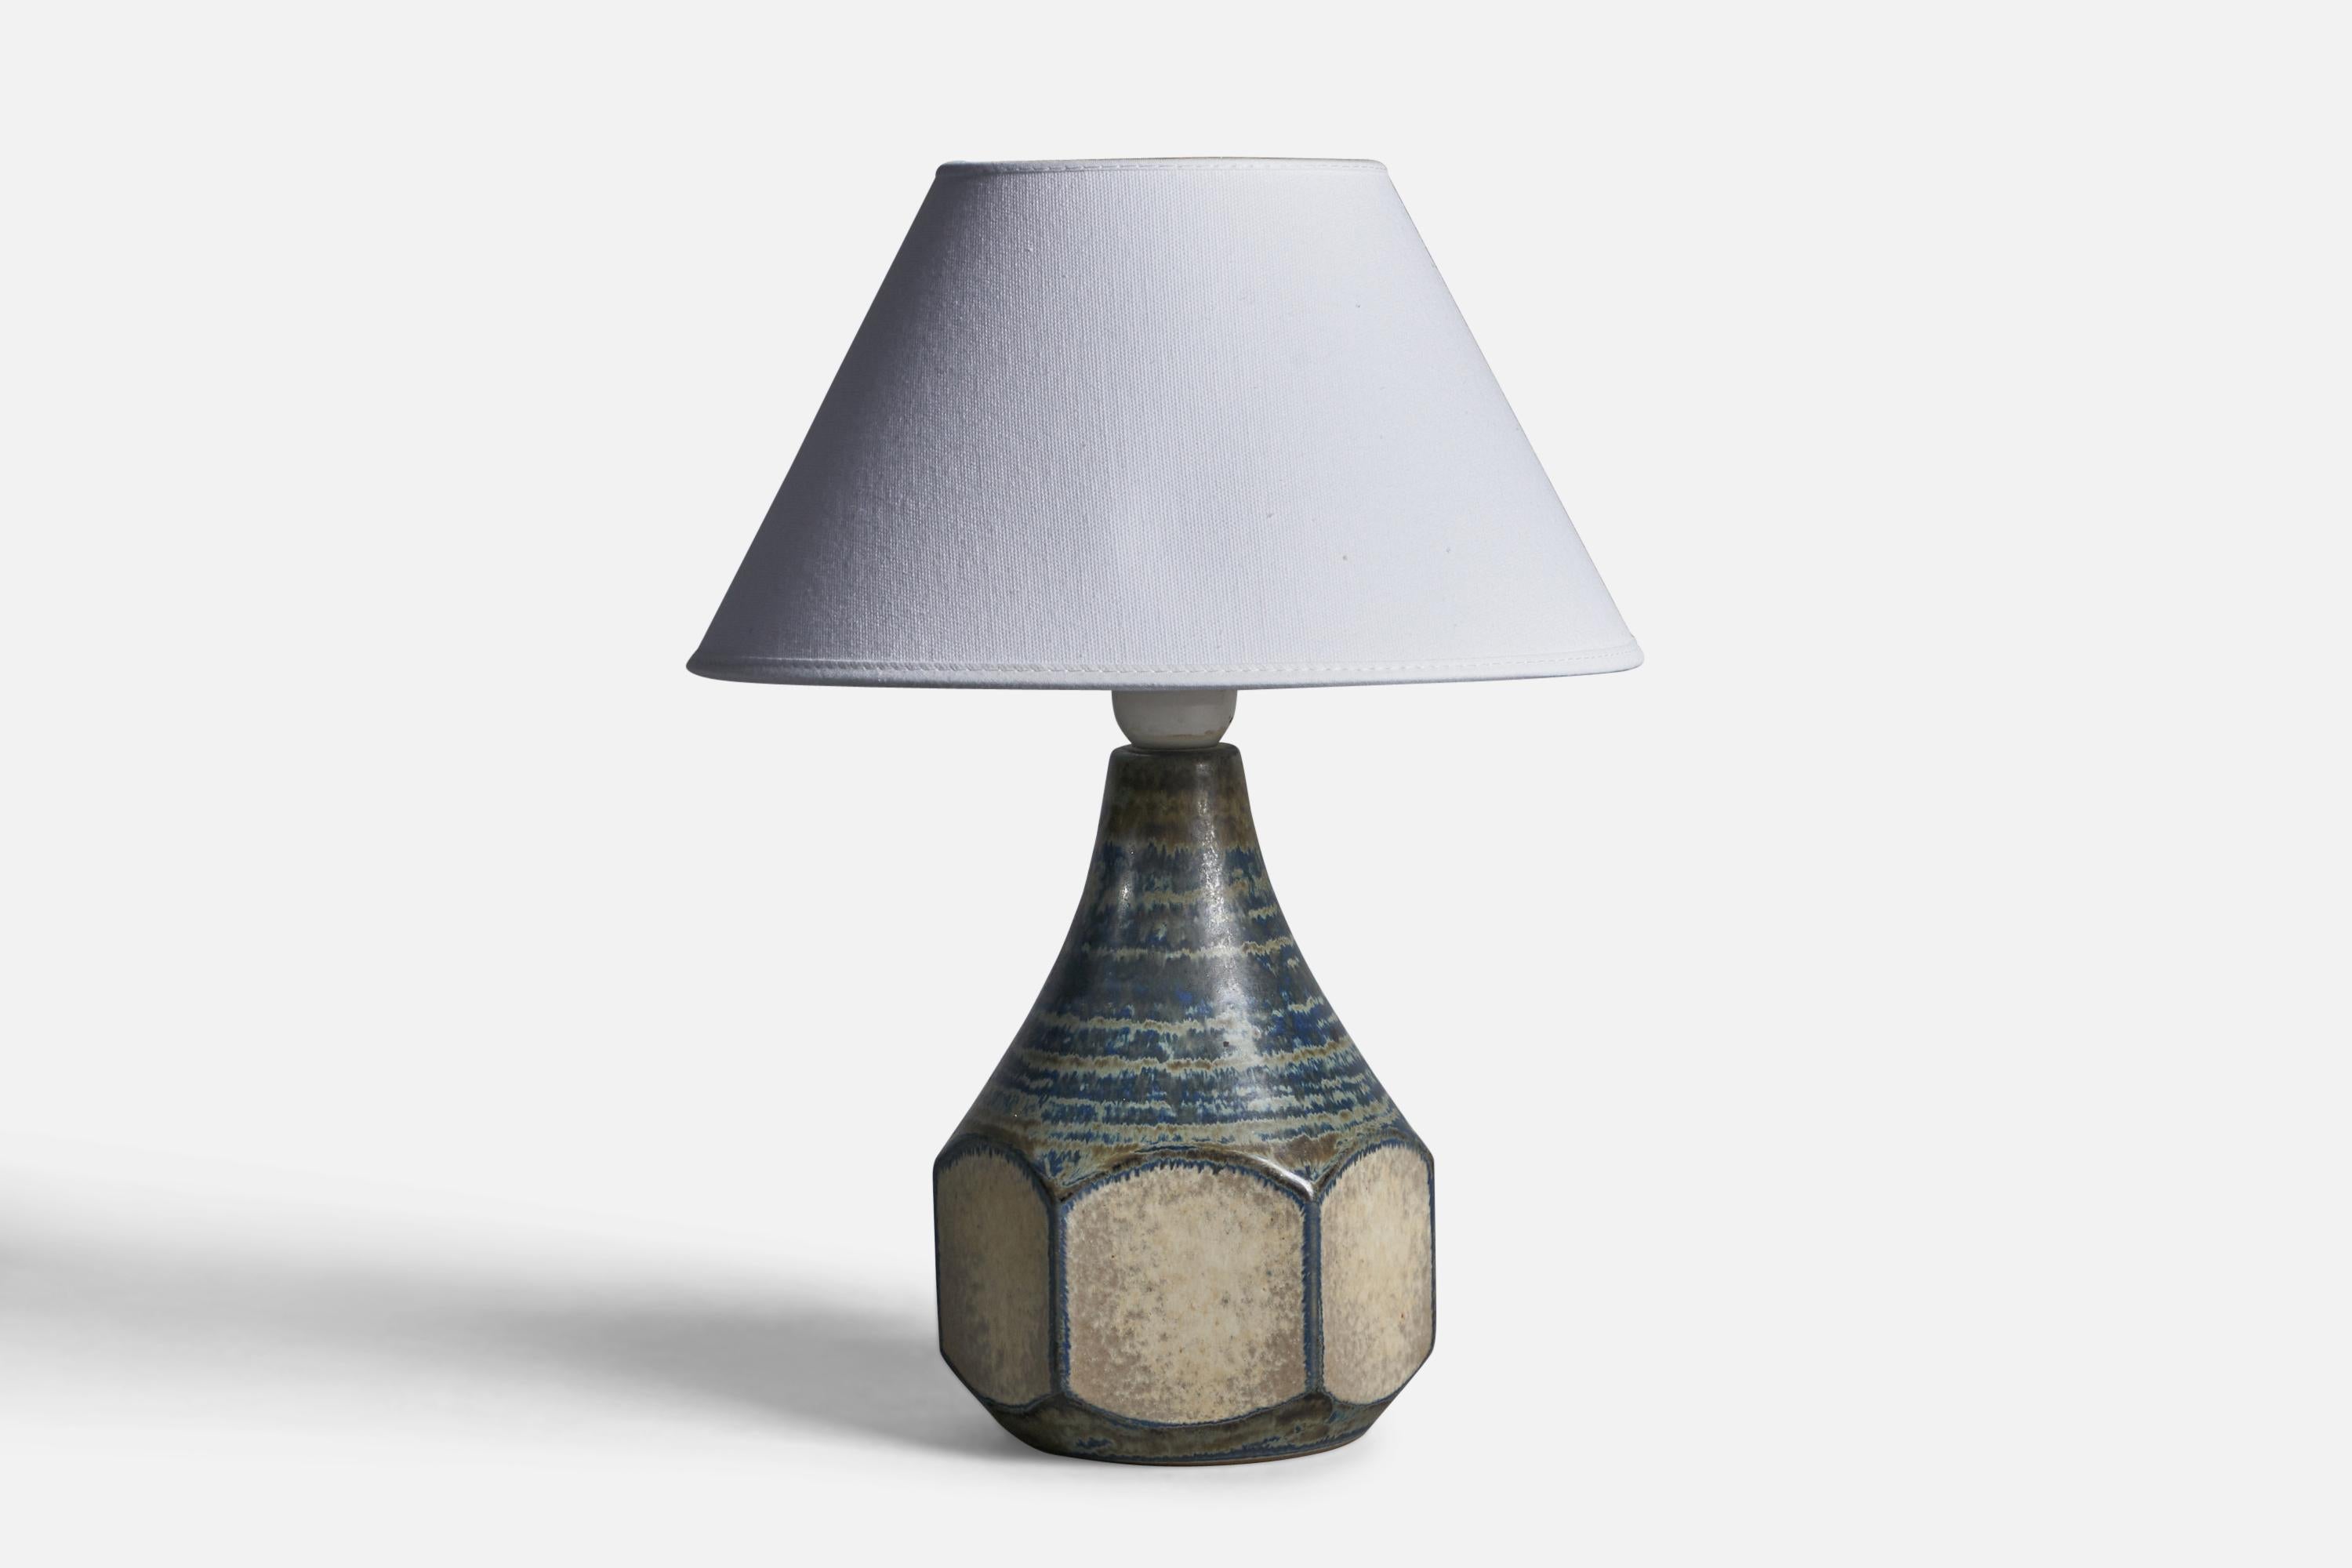 A grey and blue-glazed stoneware table lamp, designed by Marianne Starck and produced by Michael Andersen, Bornholm, Denmark, 1960s.

Dimensions of Lamp (inches): 10.5